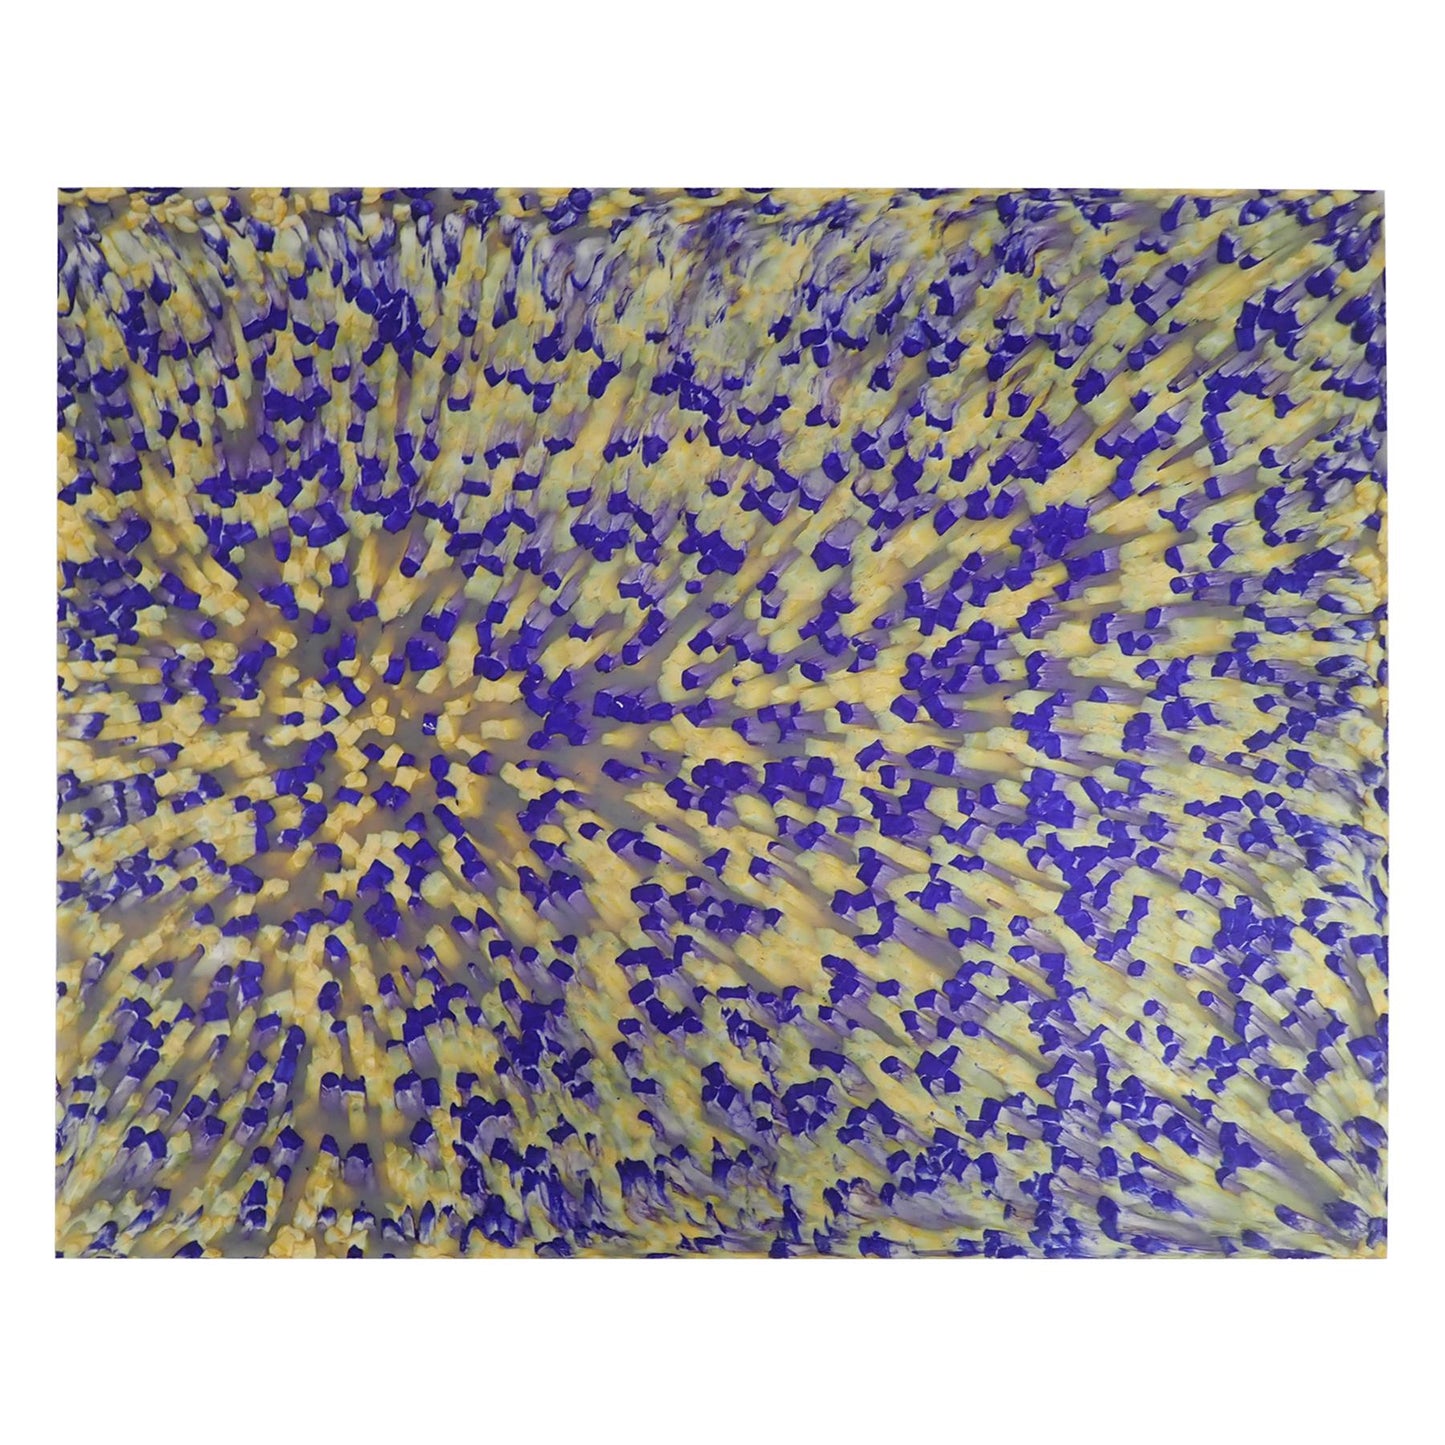 Incudo Purple and Gold Calico Casein (Galalith) Sheet - 500x400x6mm